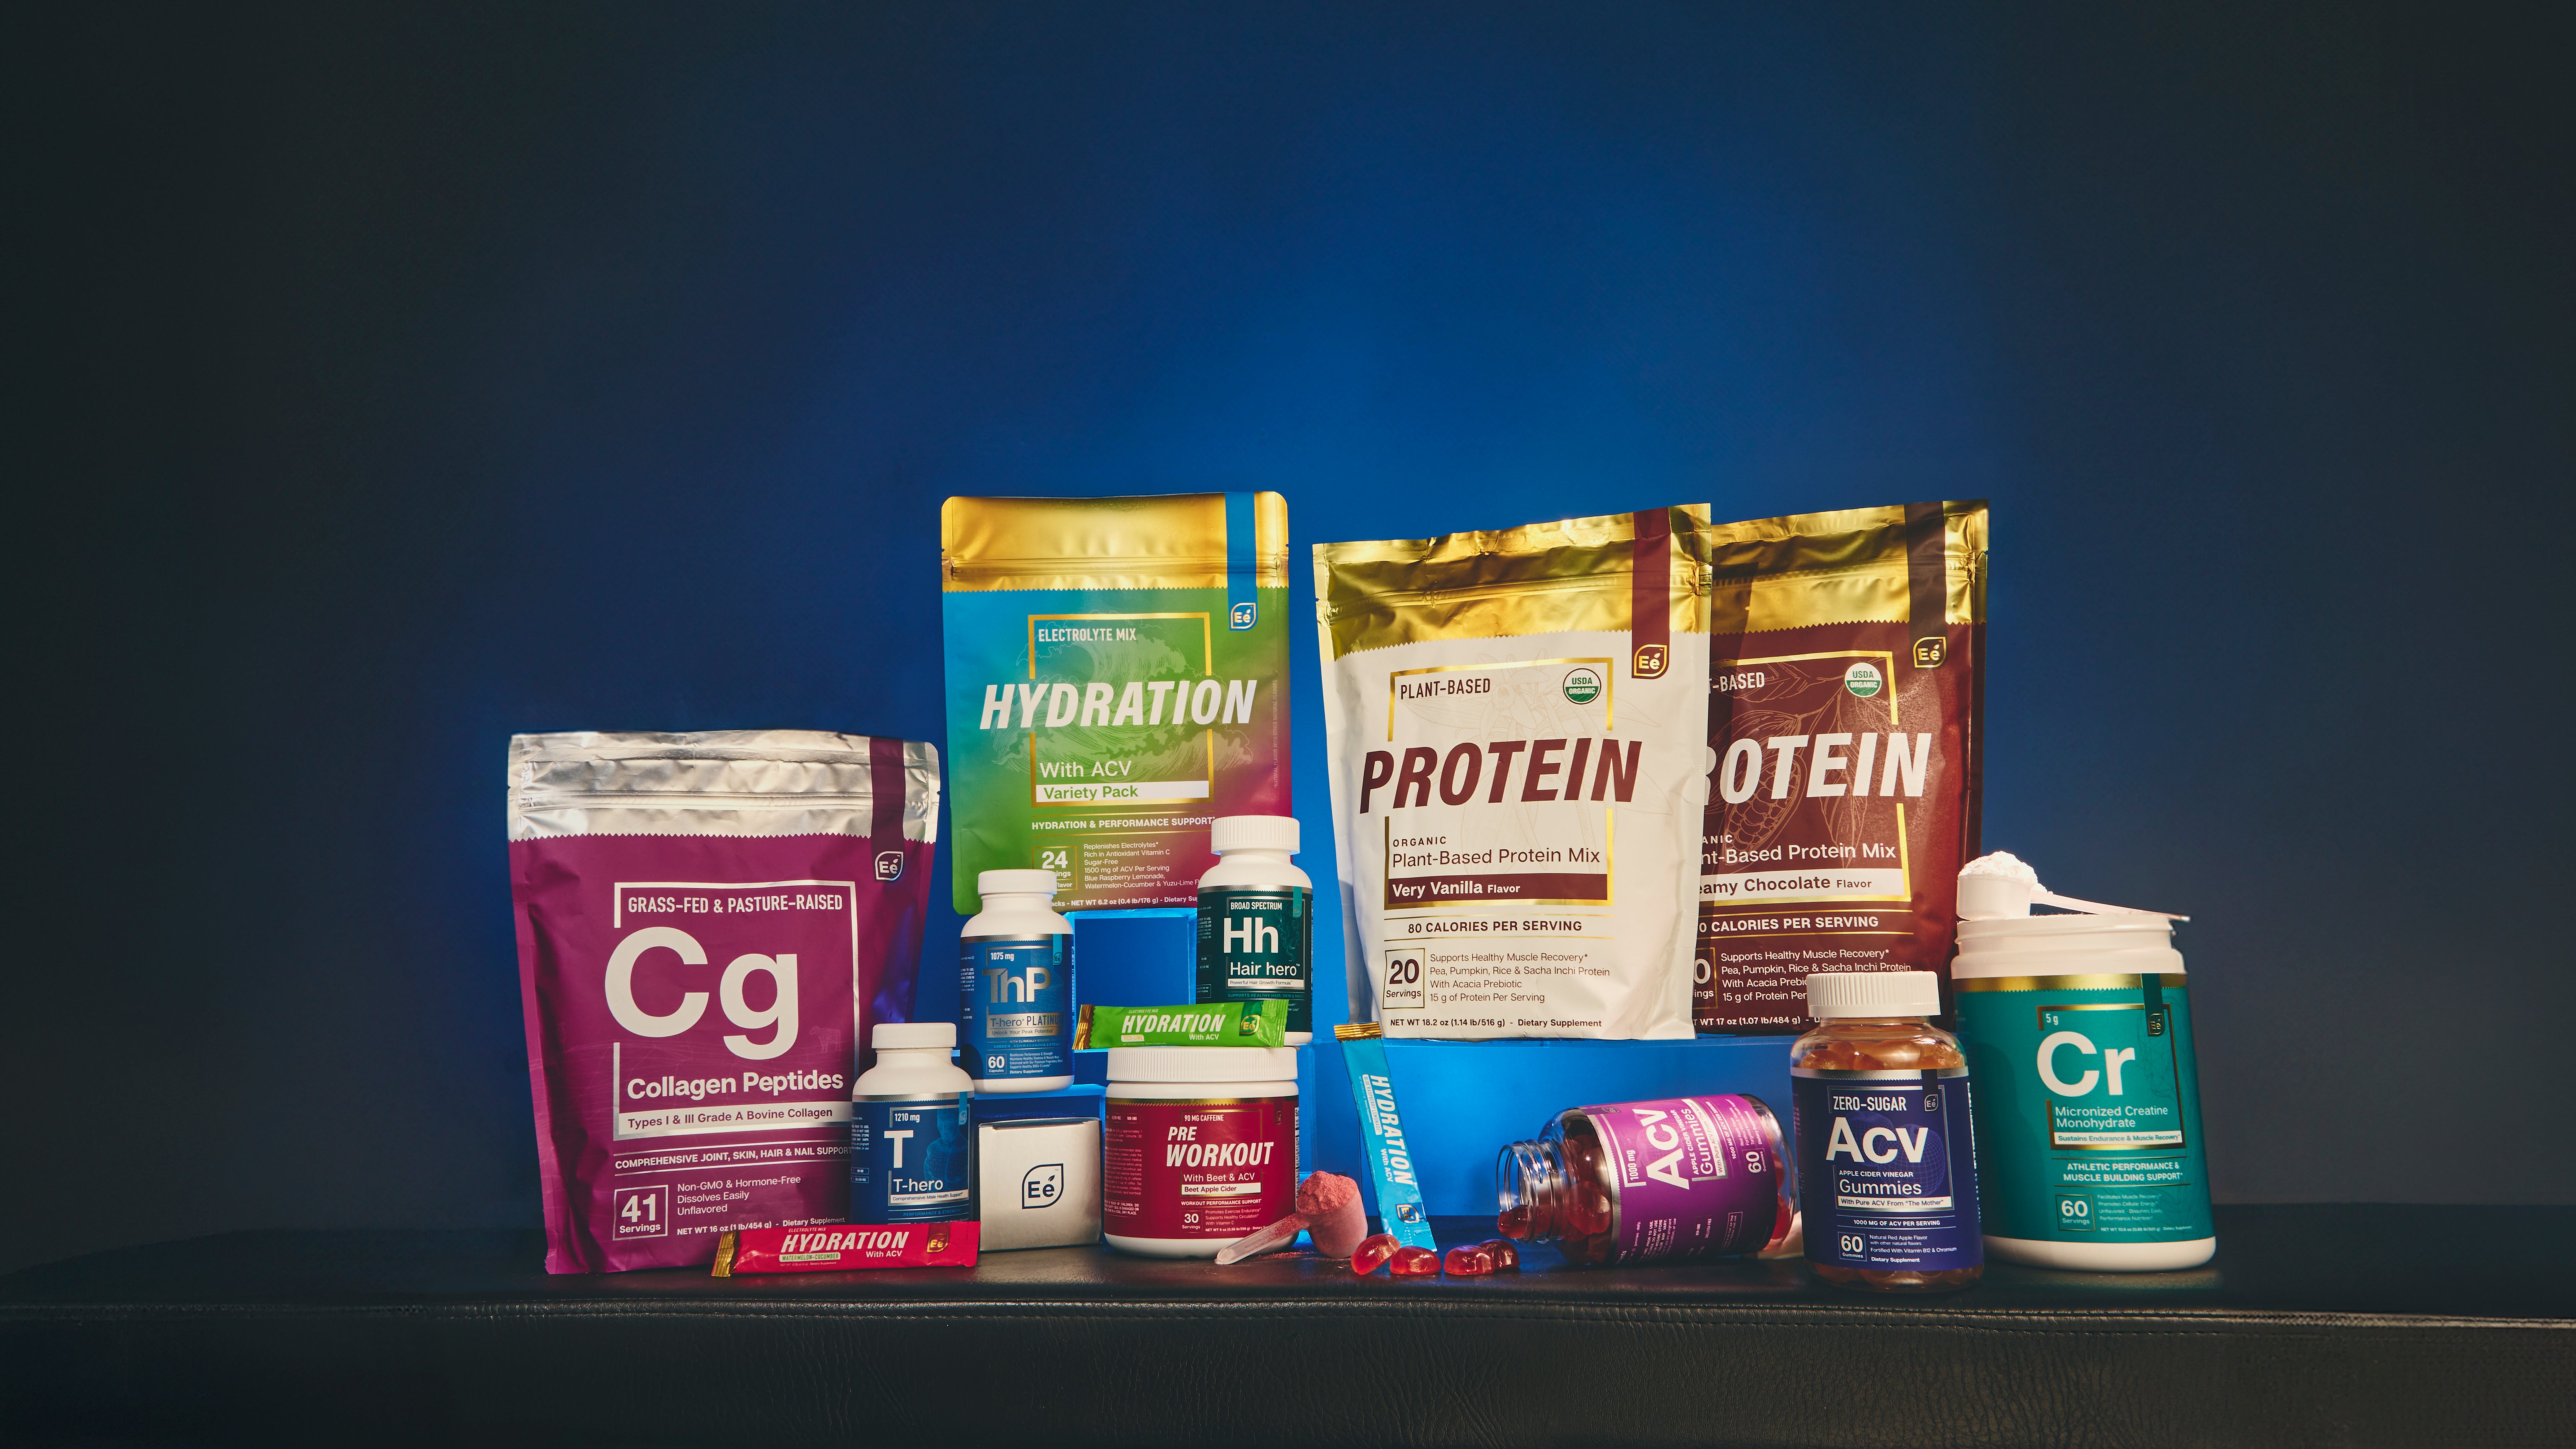 A display of Essential elements supplements.